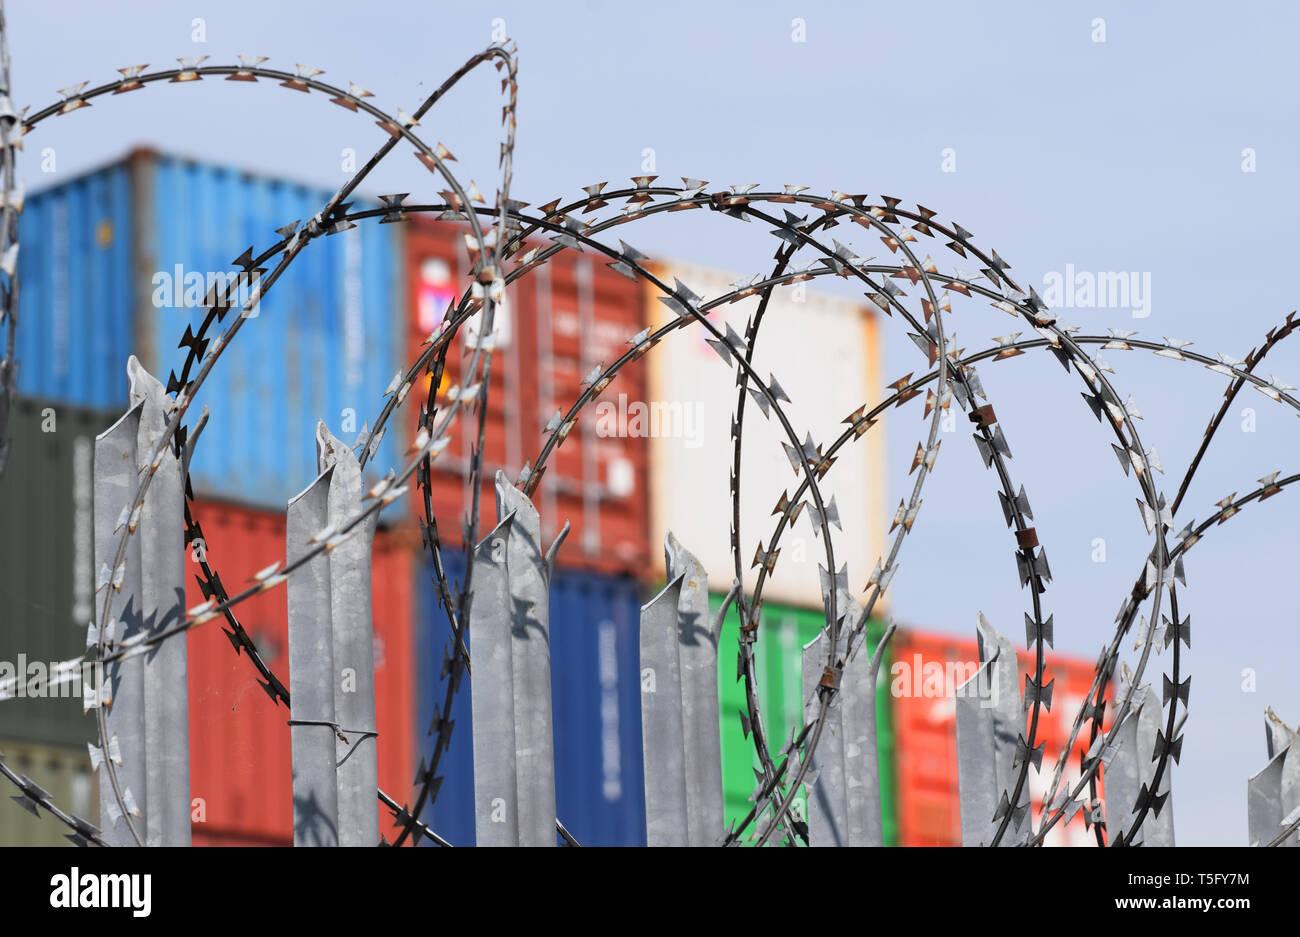 Freight Shipping Containers behind barbed wire at one of the UK's busiest commercial ports. A good potential image for trade barriers or hard border Stock Photo